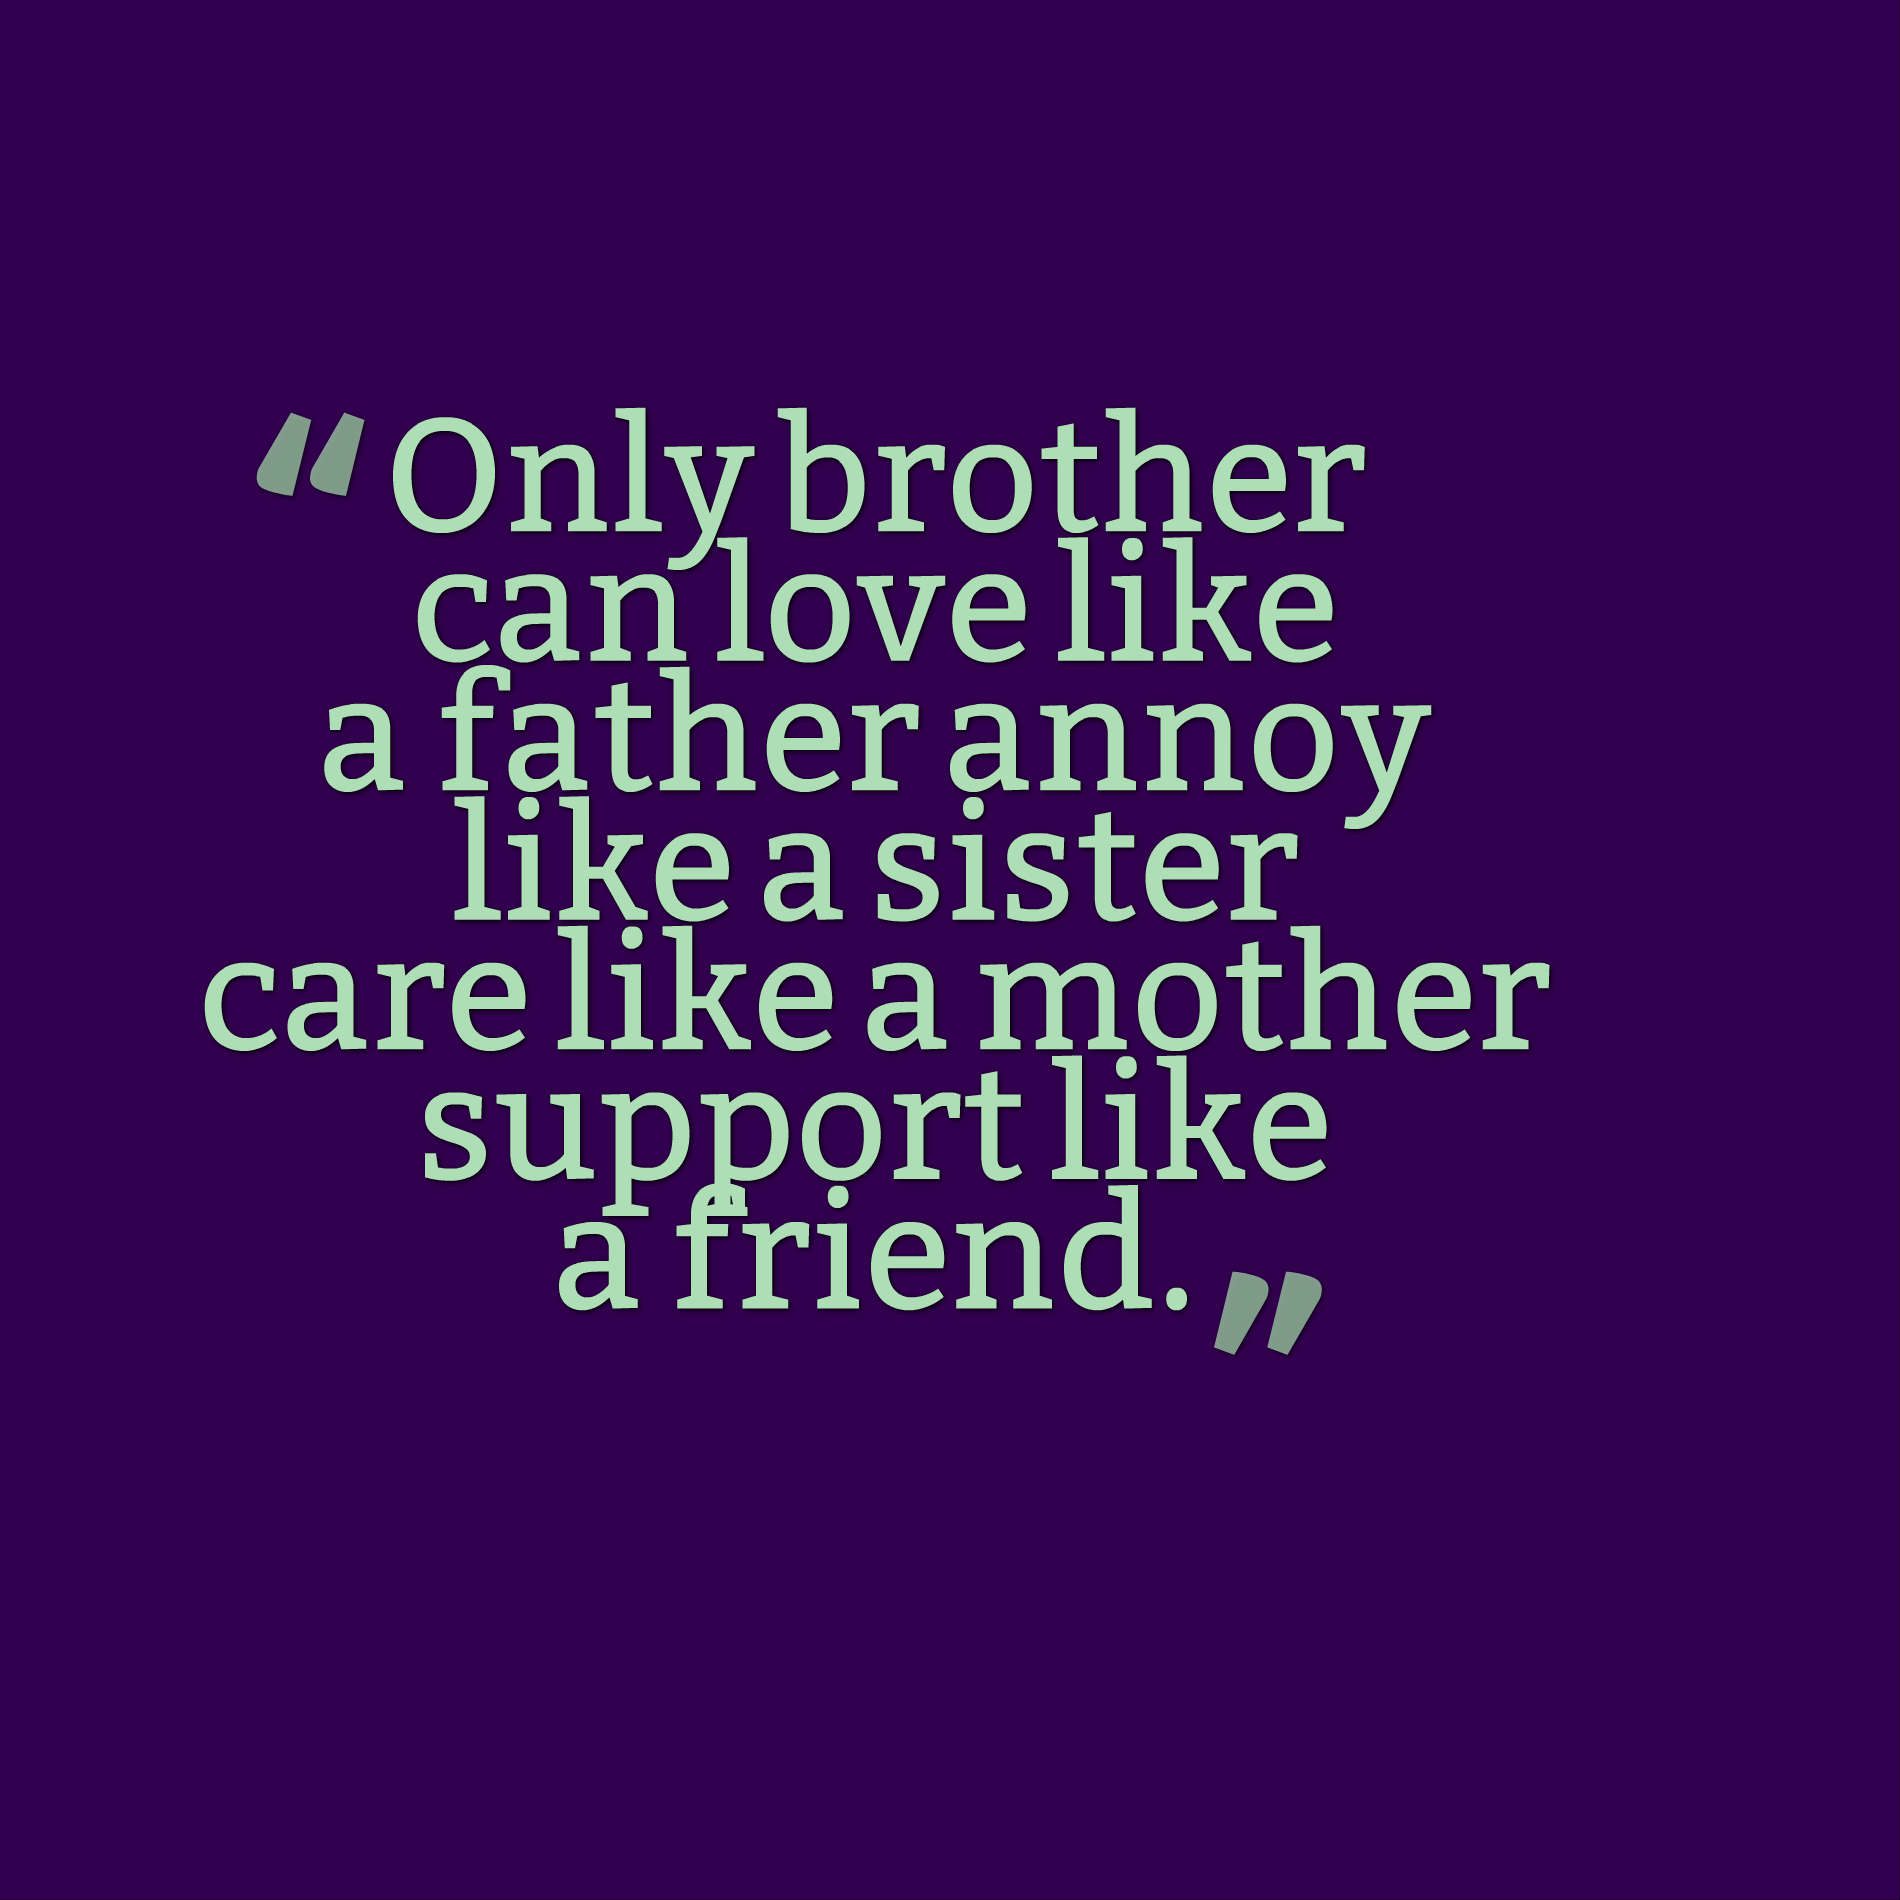 Quotes about brother. Sister caress brother. Best quotes about brother and sister. Lost a brother quotes.